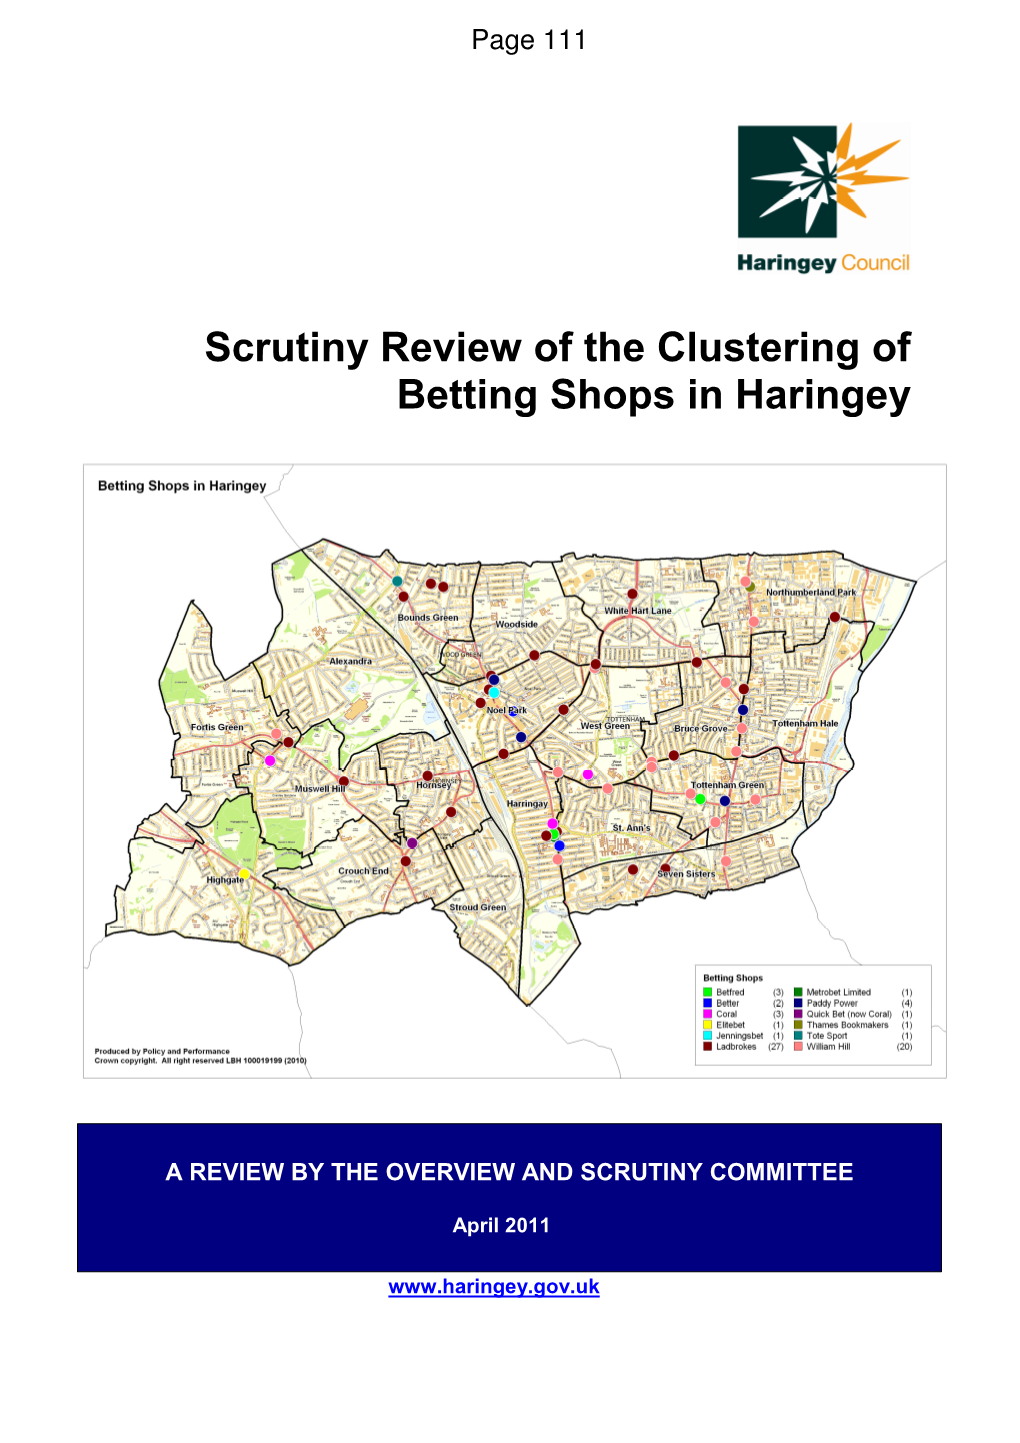 Scrutiny Review of the Clustering of Betting Shops in Haringey